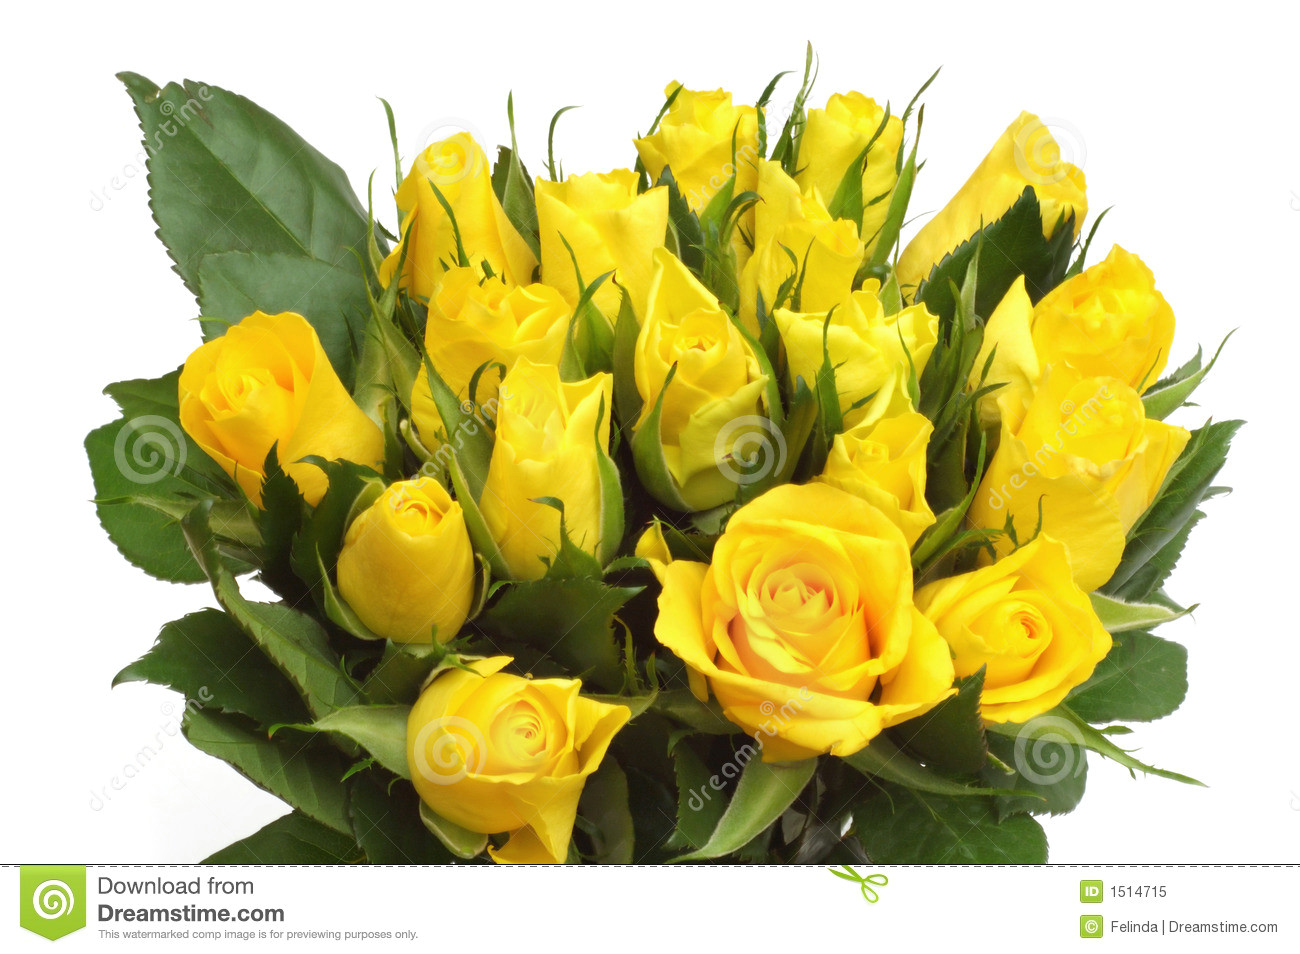 Drawings Of Yellow Roses Yellow Roses Bouquet Stock Image Image Of Delicate Greeting 1514715